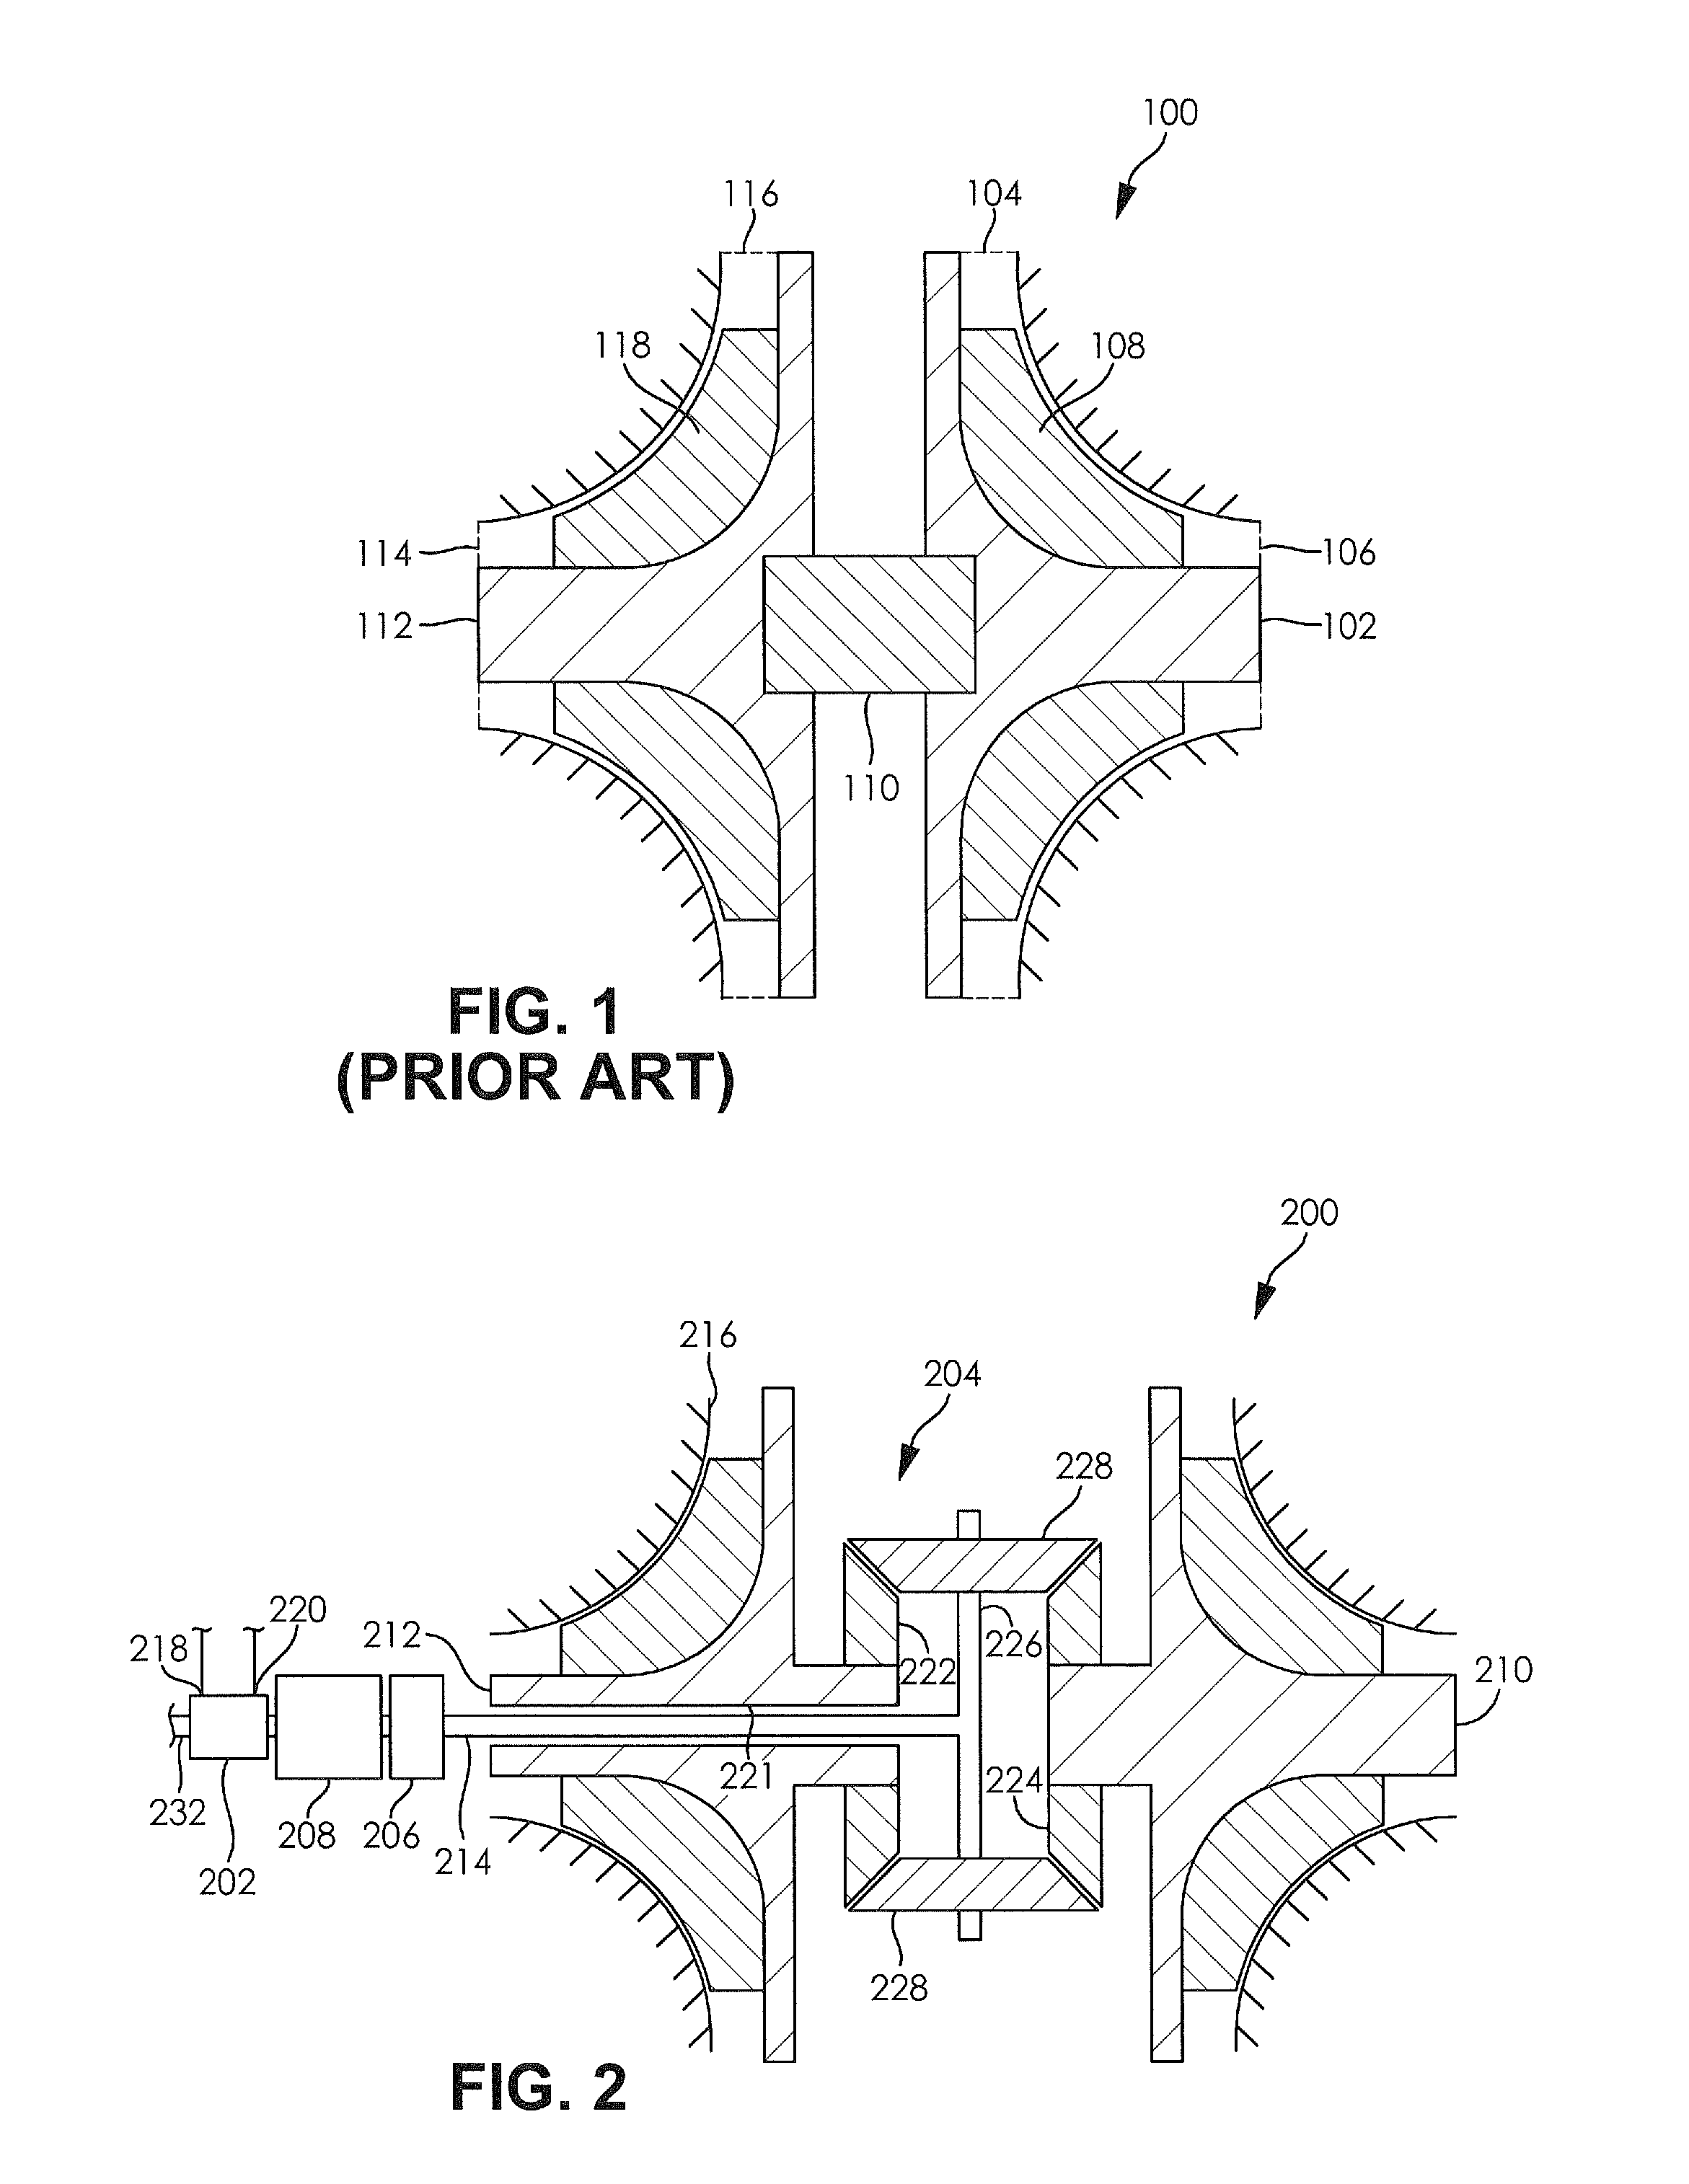 Internal combustion engine coupled turbocharger with an infinitely variable transmission